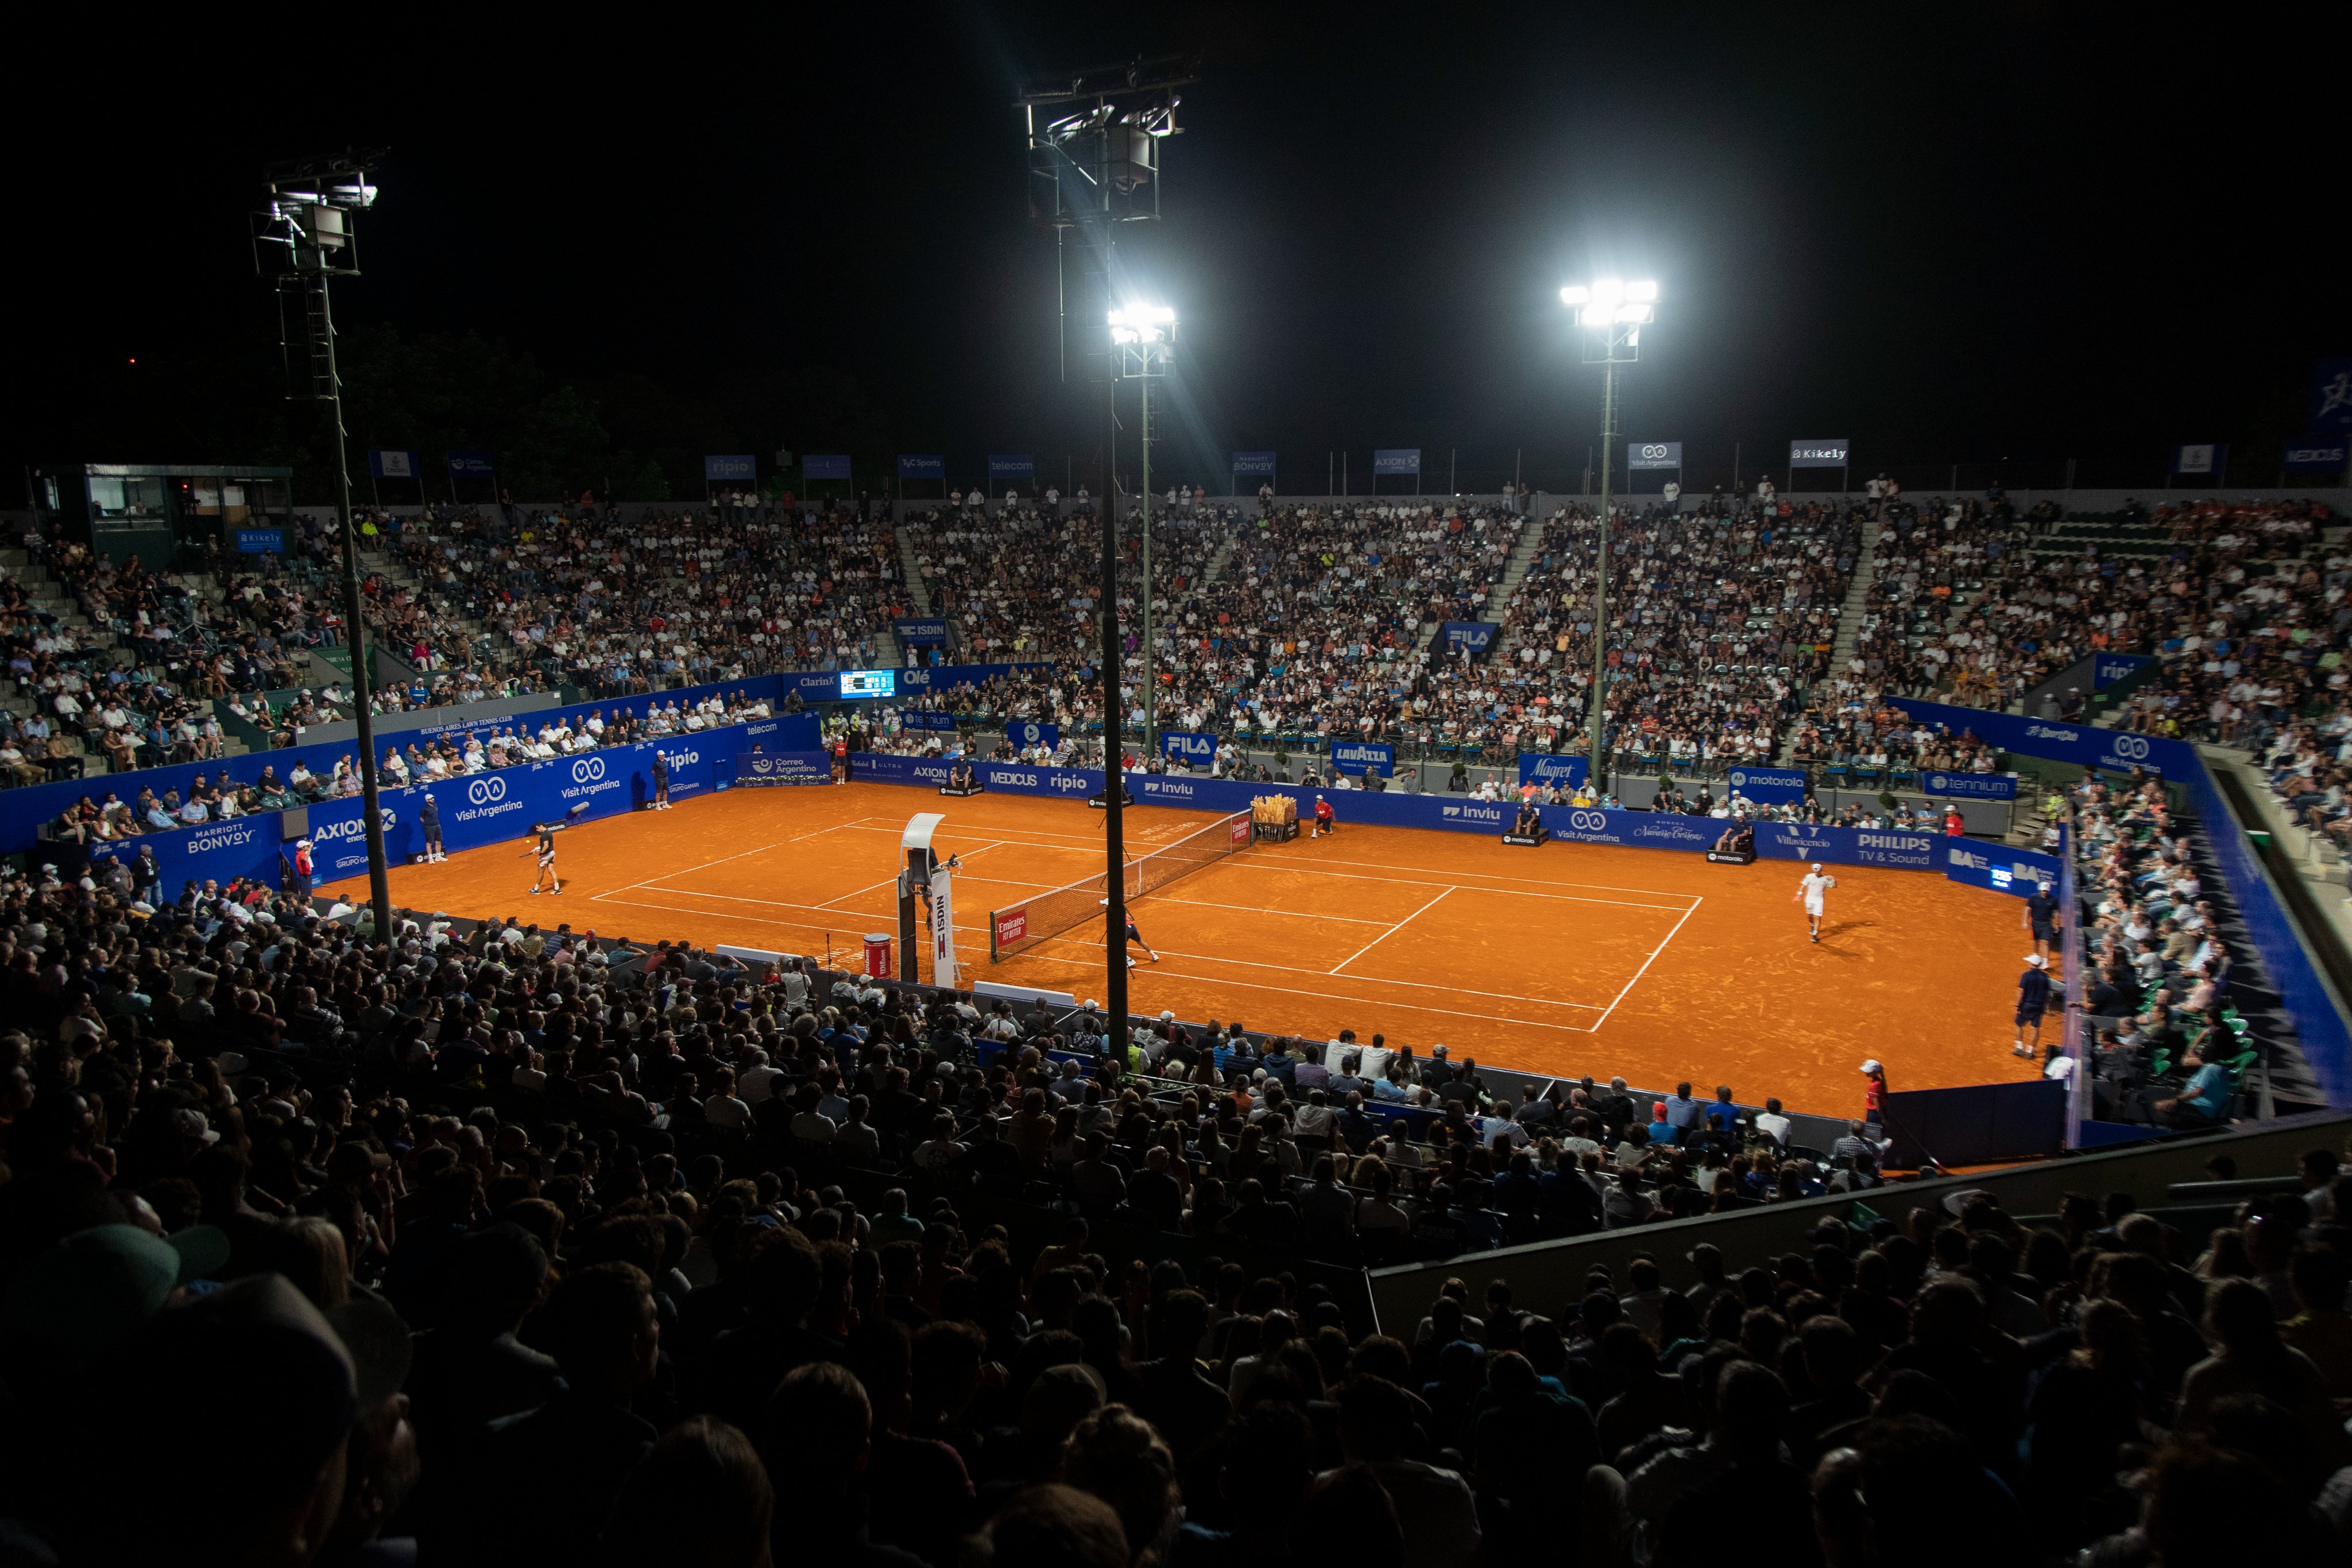 How to watch Varillas vs. Sousa on live streaming in Buenos Aires